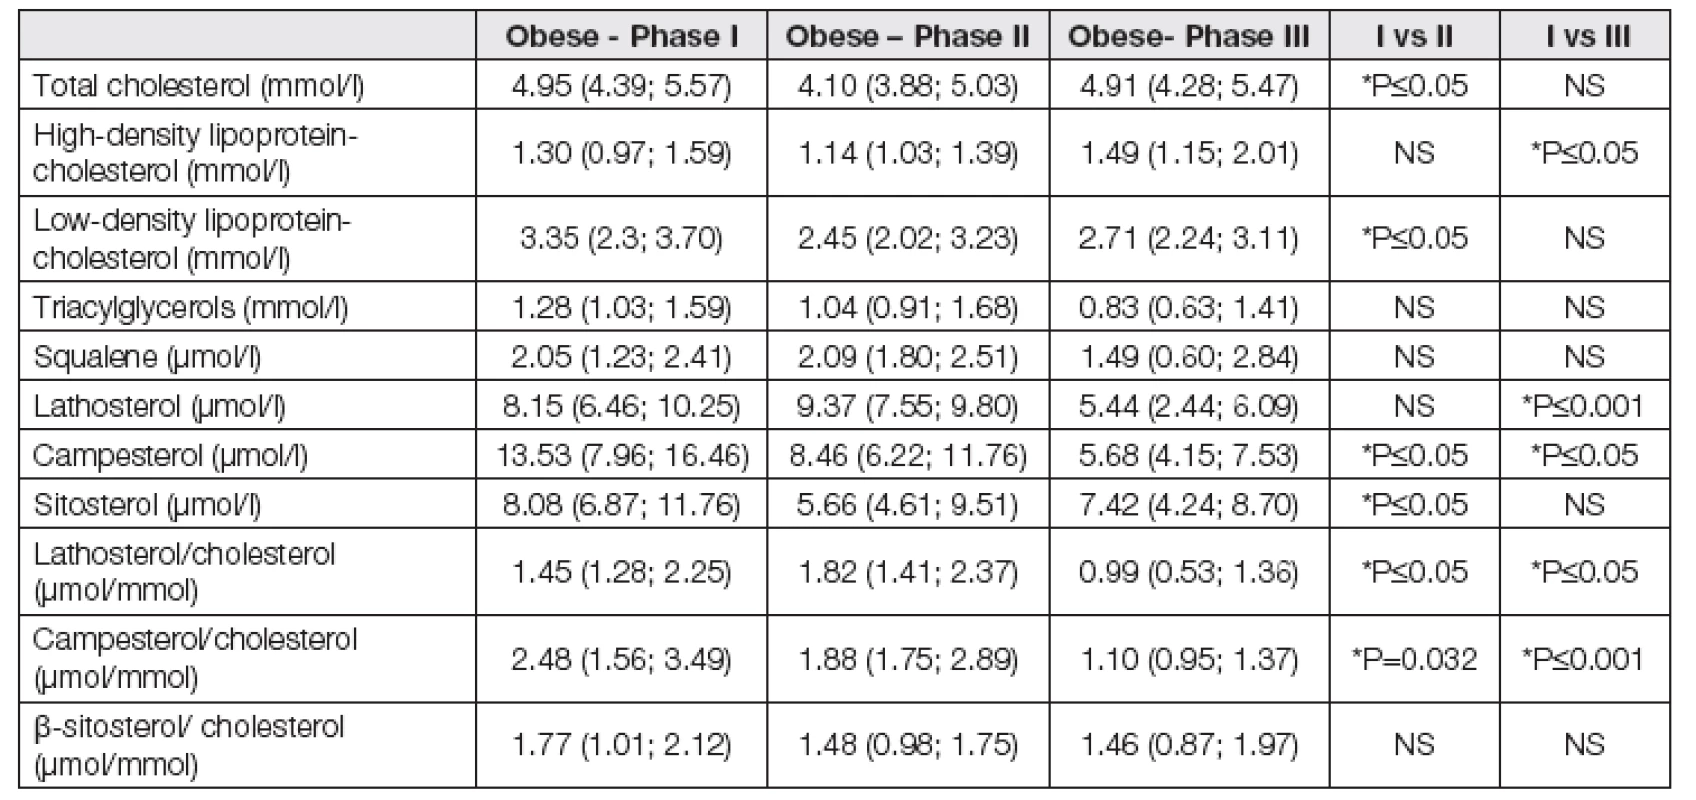 Characteristics of cholesterol metabolism in obese type 1 diabetics during the weight reduction programme.